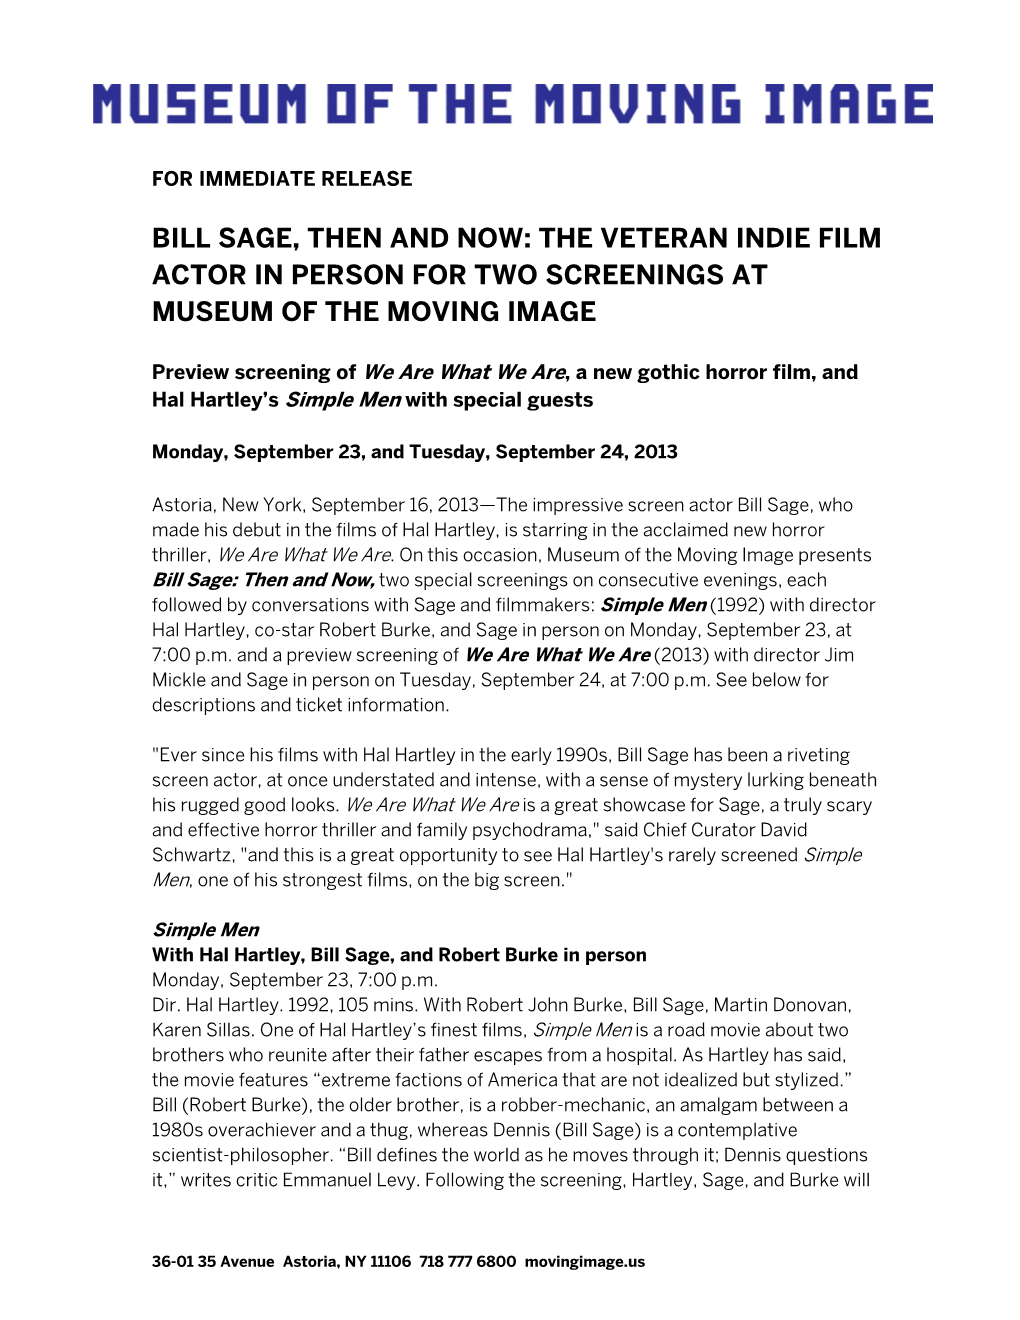 Bill Sage, Then and Now: the Veteran Indie Film Actor in Person for Two Screenings at Museum of the Moving Image